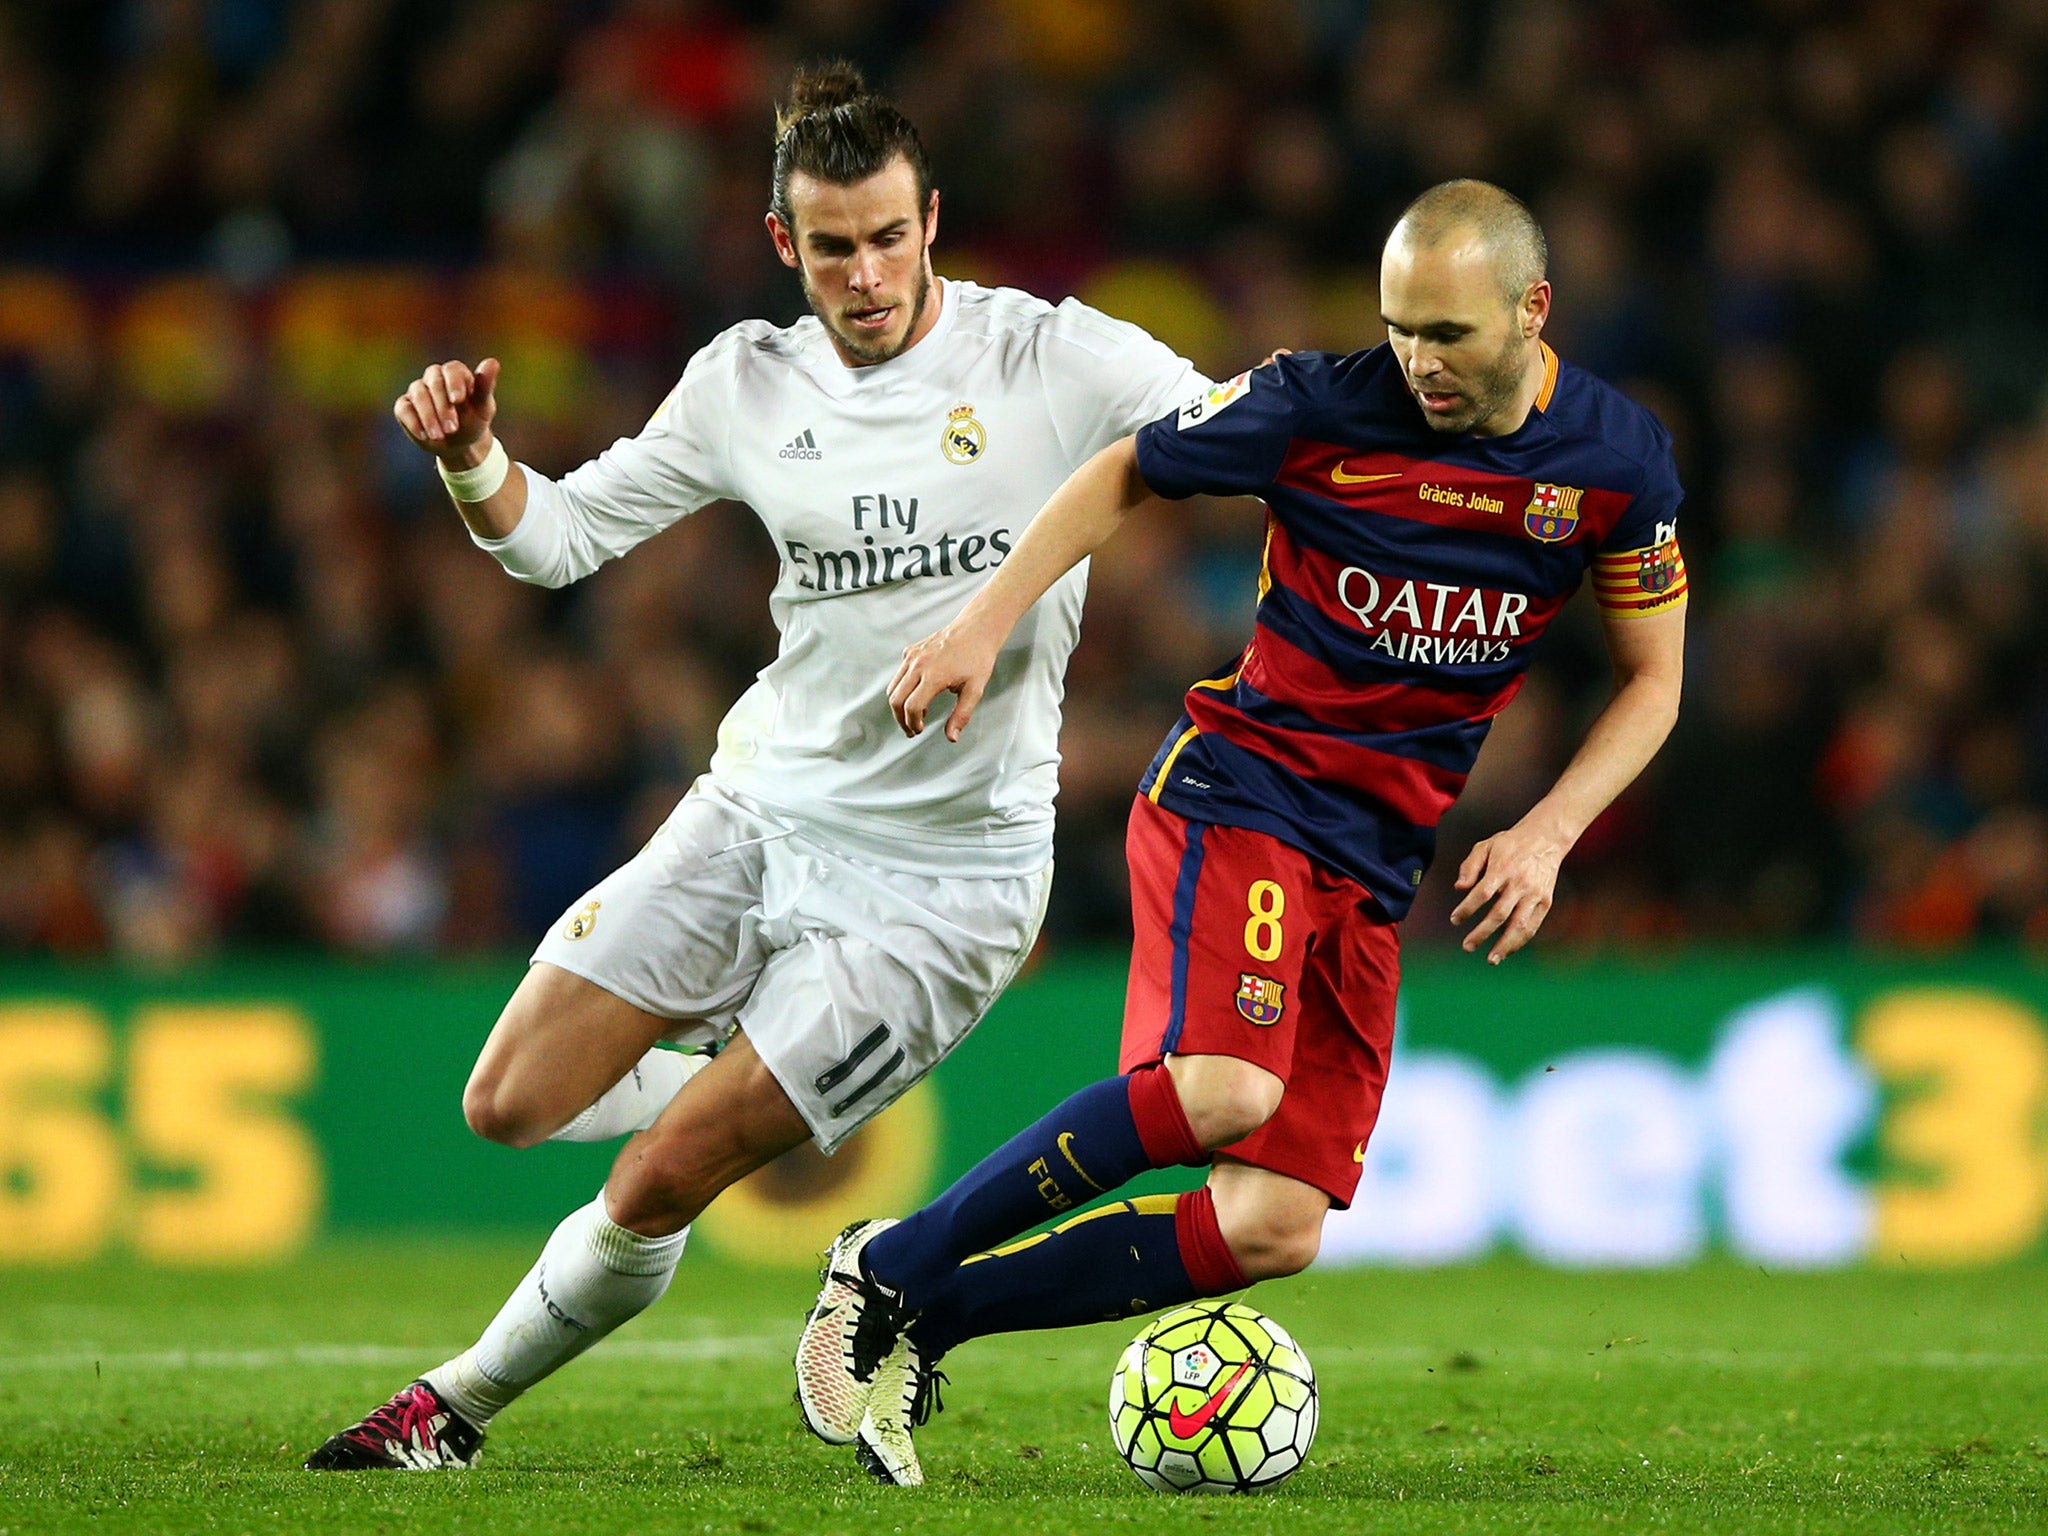 Real Madrid and Barcelona will have to wait until December for the first El Clasico of the season